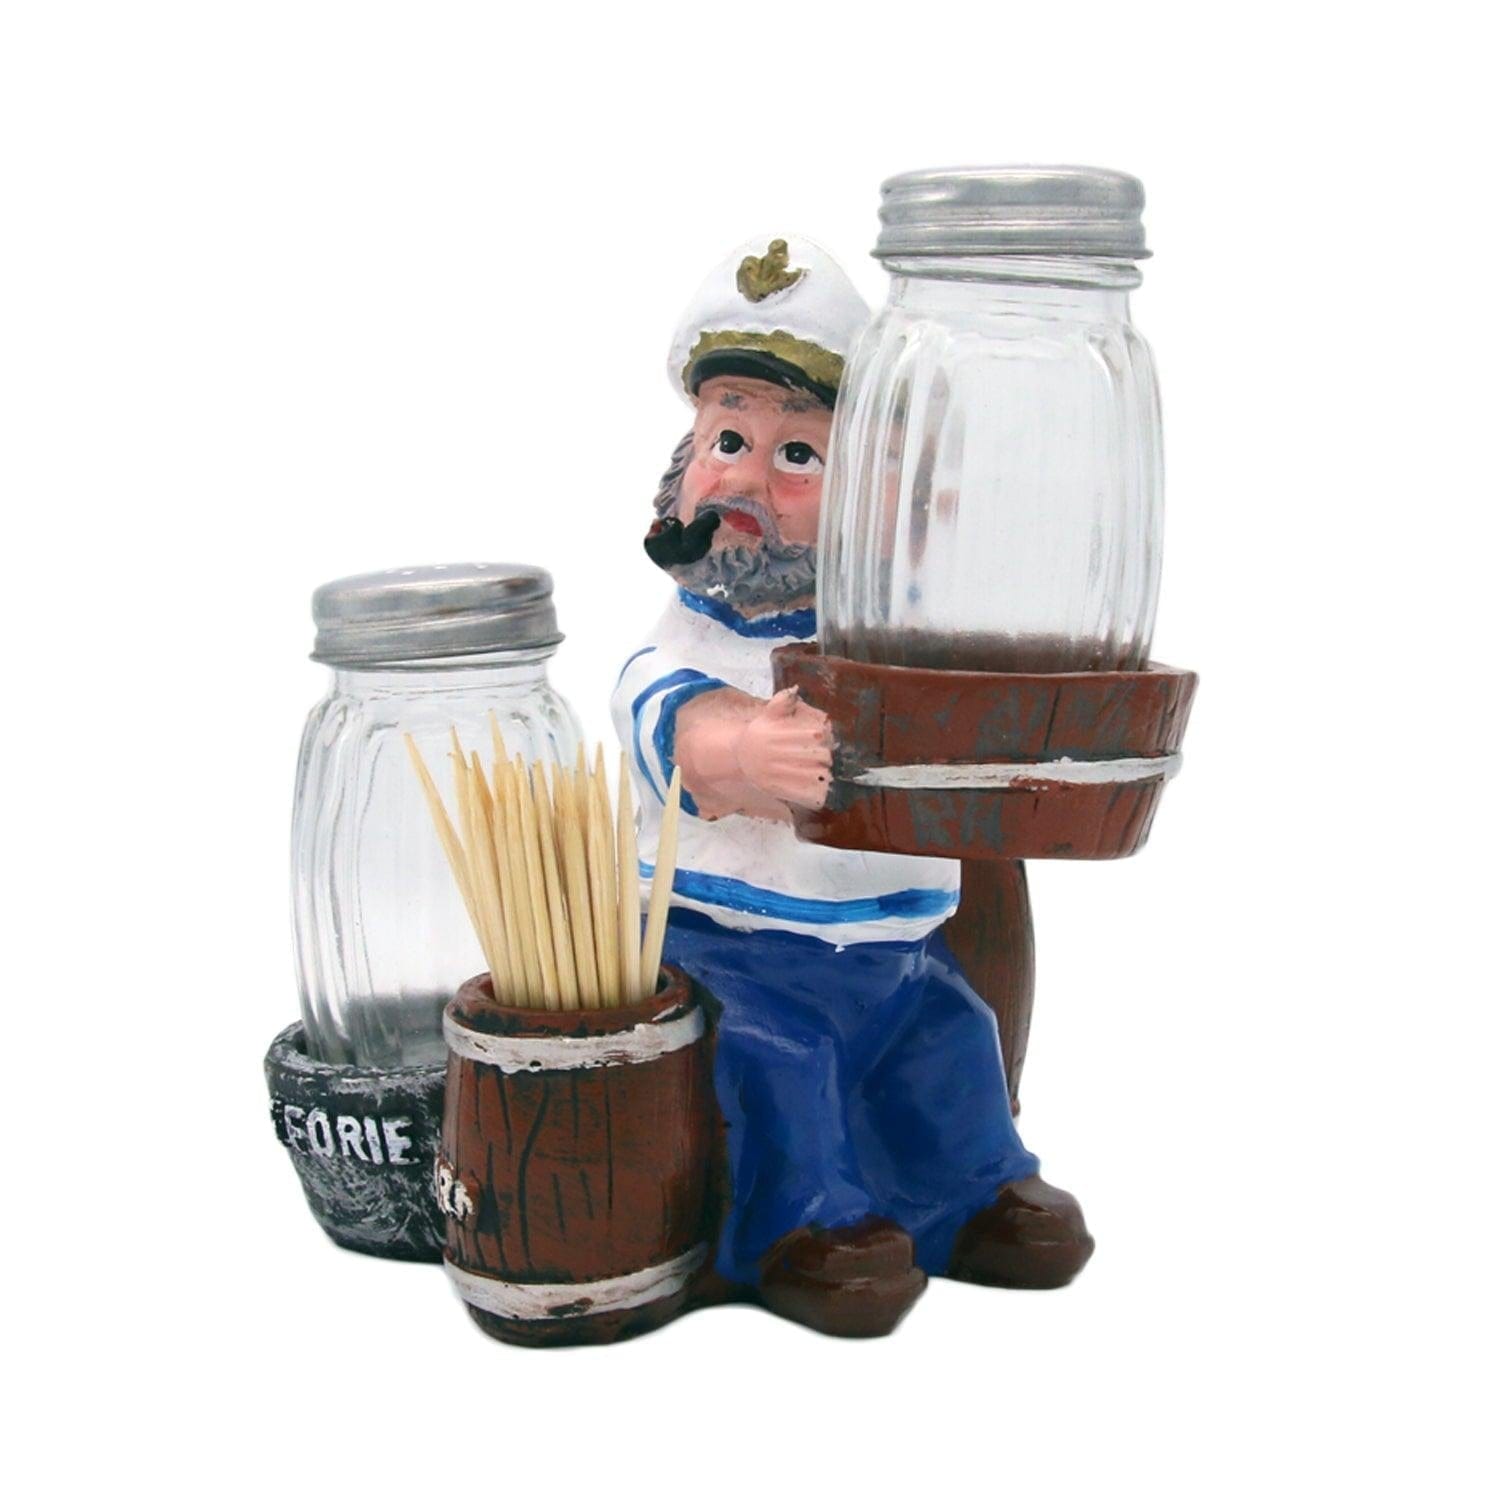 Nautical Sailor Figurine Resin Salt & Pepper Shakers with Toothpick & Napkin Holder Set (Blue in White)